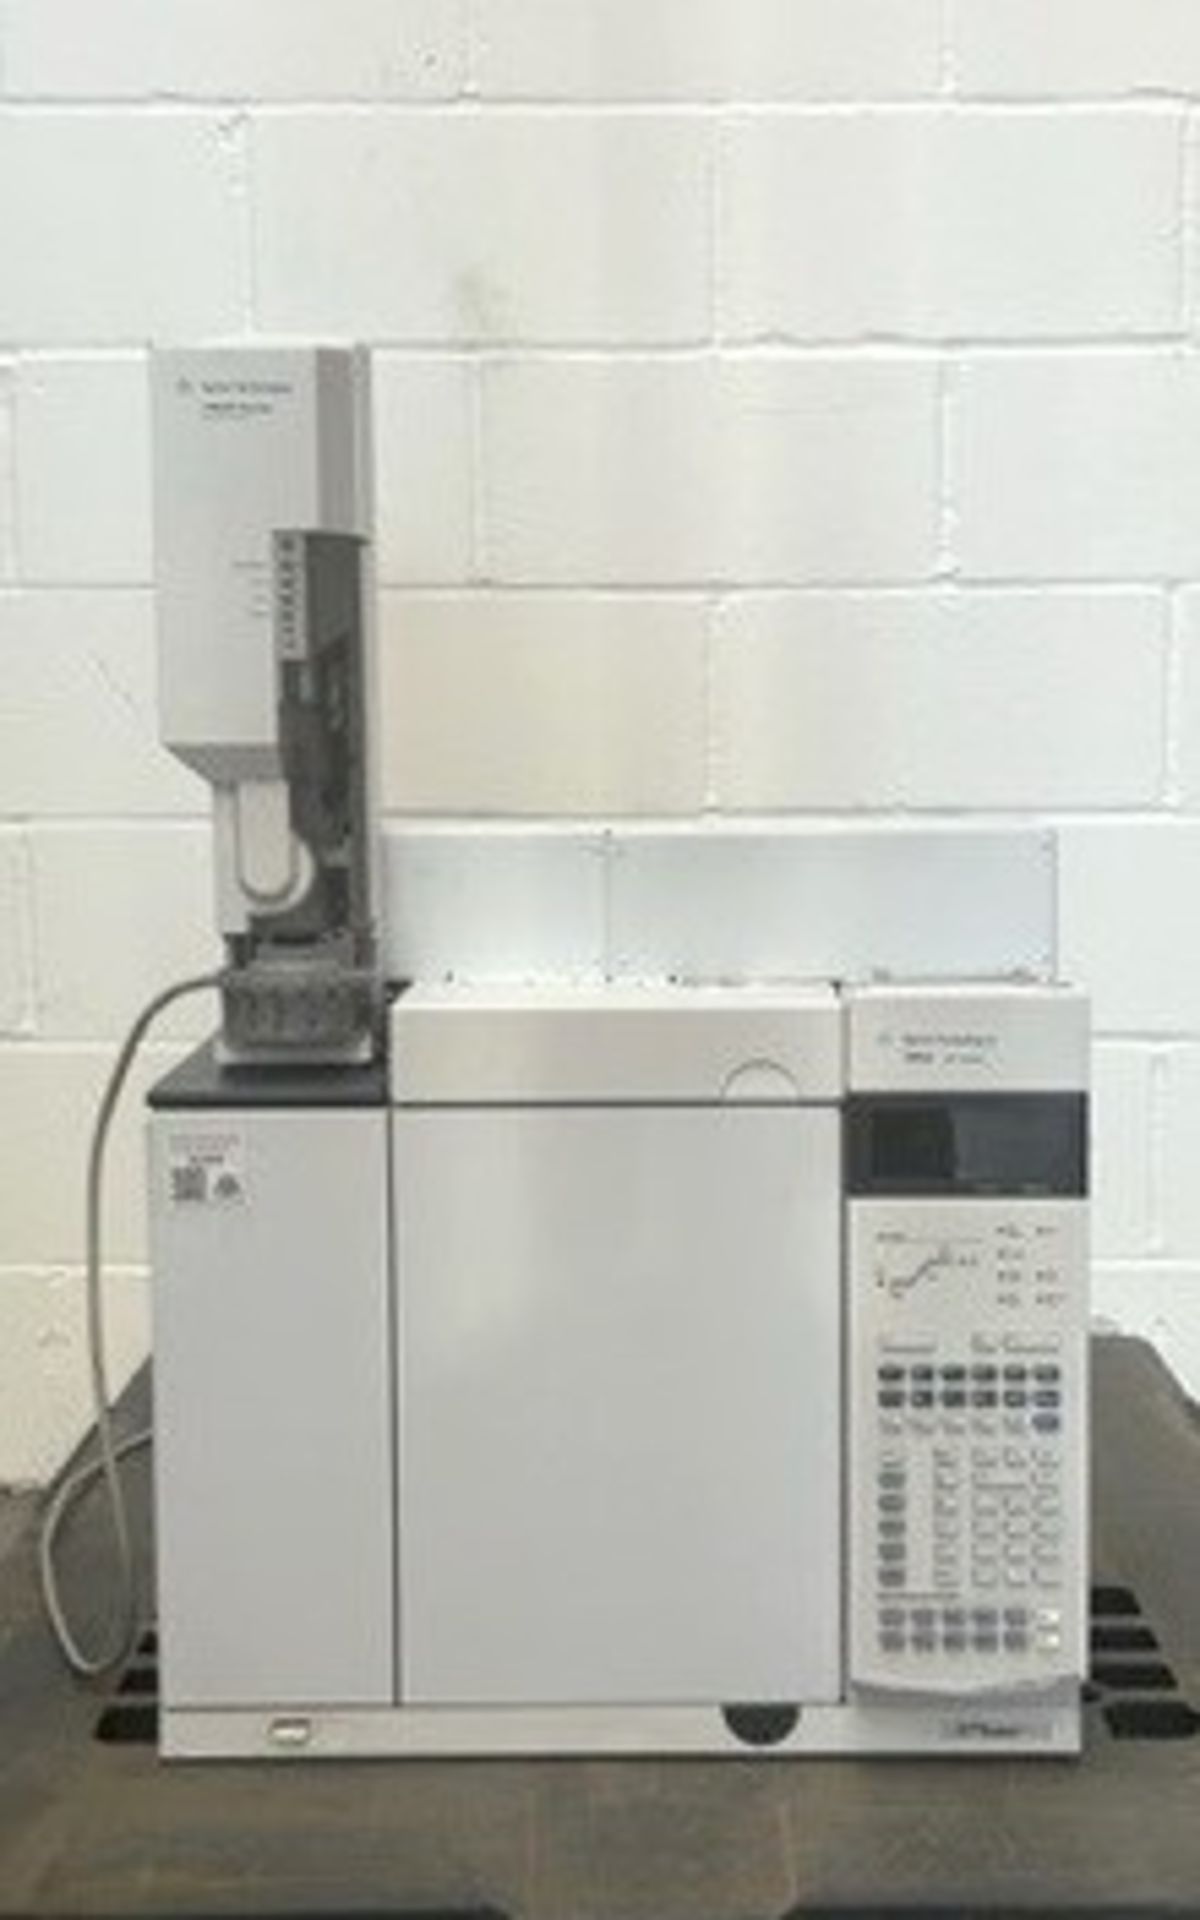 Agilent 7890A GC System with 7683B Series Injector